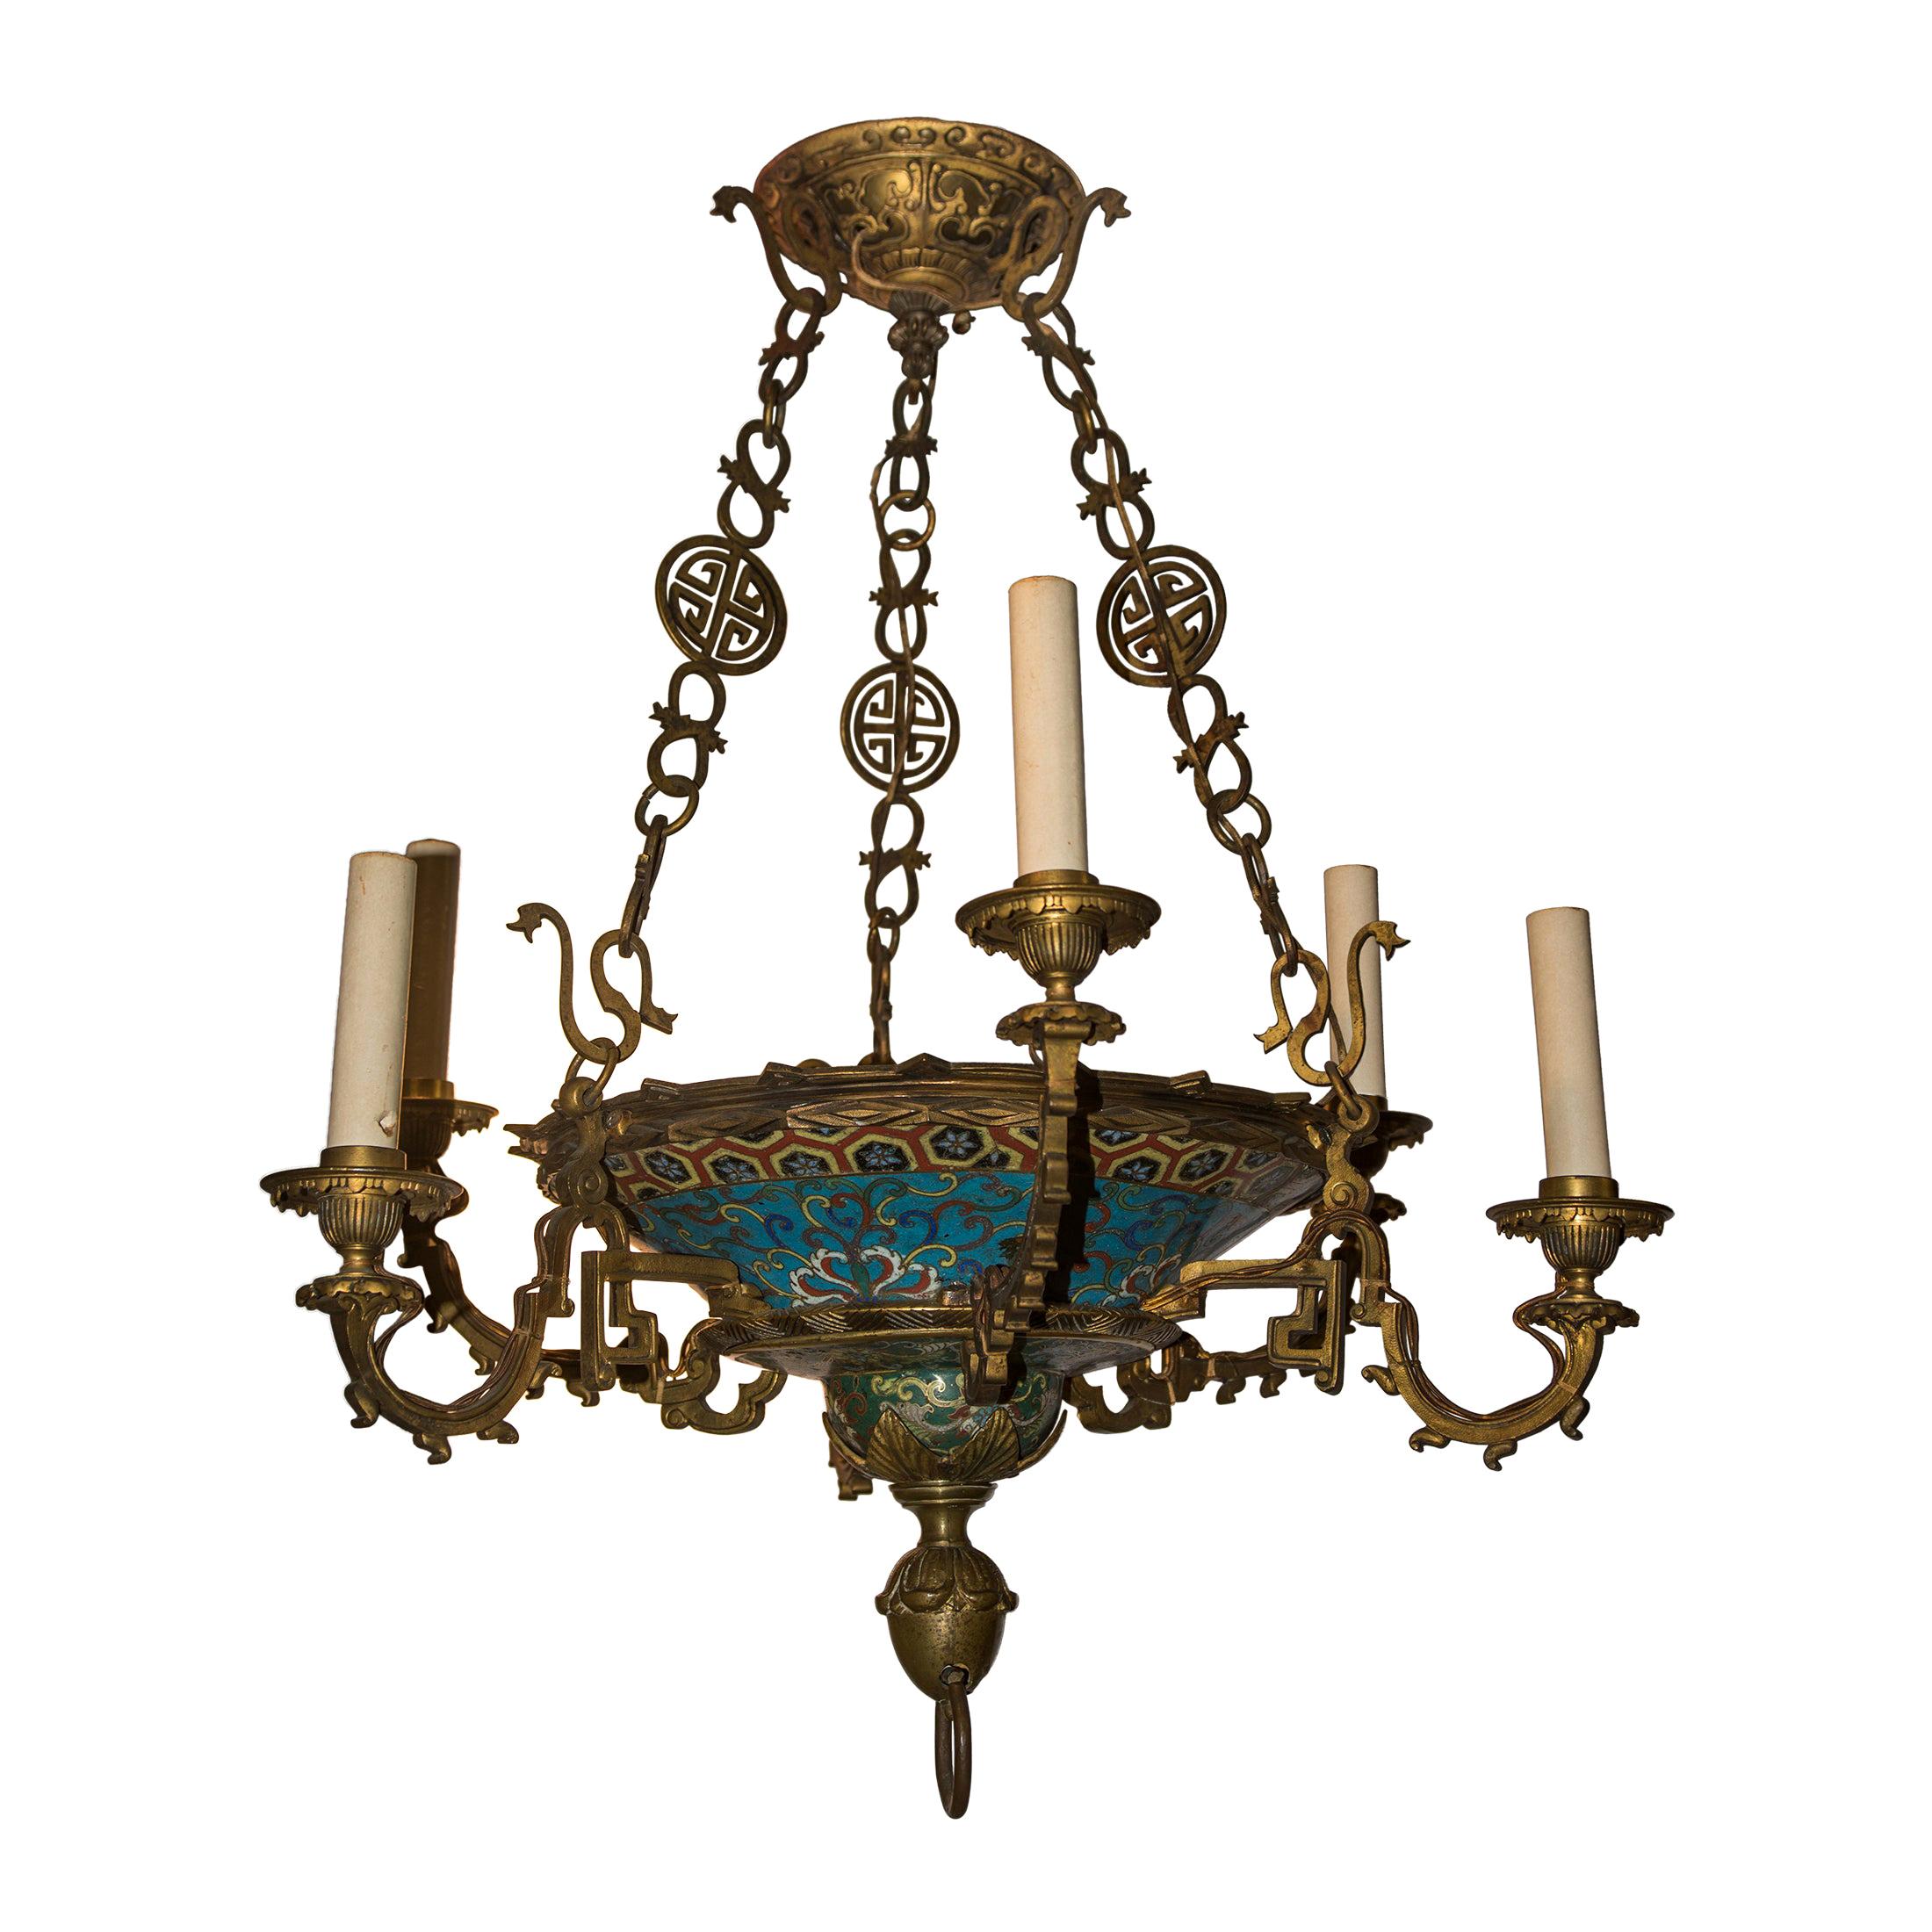 Rare and Unusual French Japonisme Champlevé Enamel Chandelier